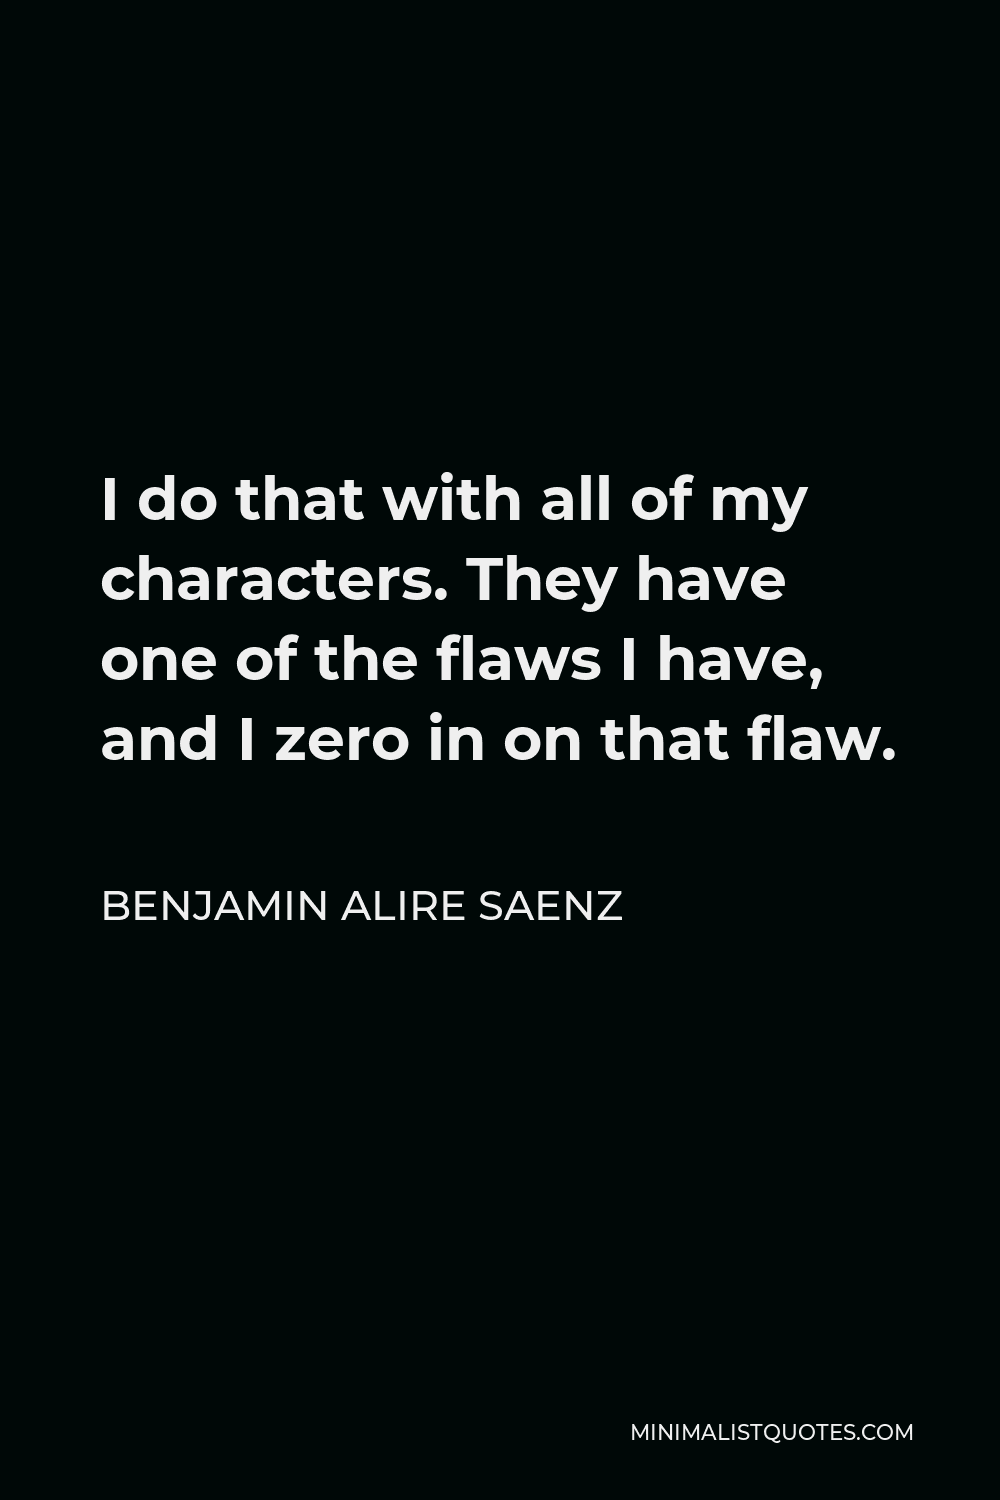 Benjamin Alire Saenz Quote - I do that with all of my characters. They have one of the flaws I have, and I zero in on that flaw.